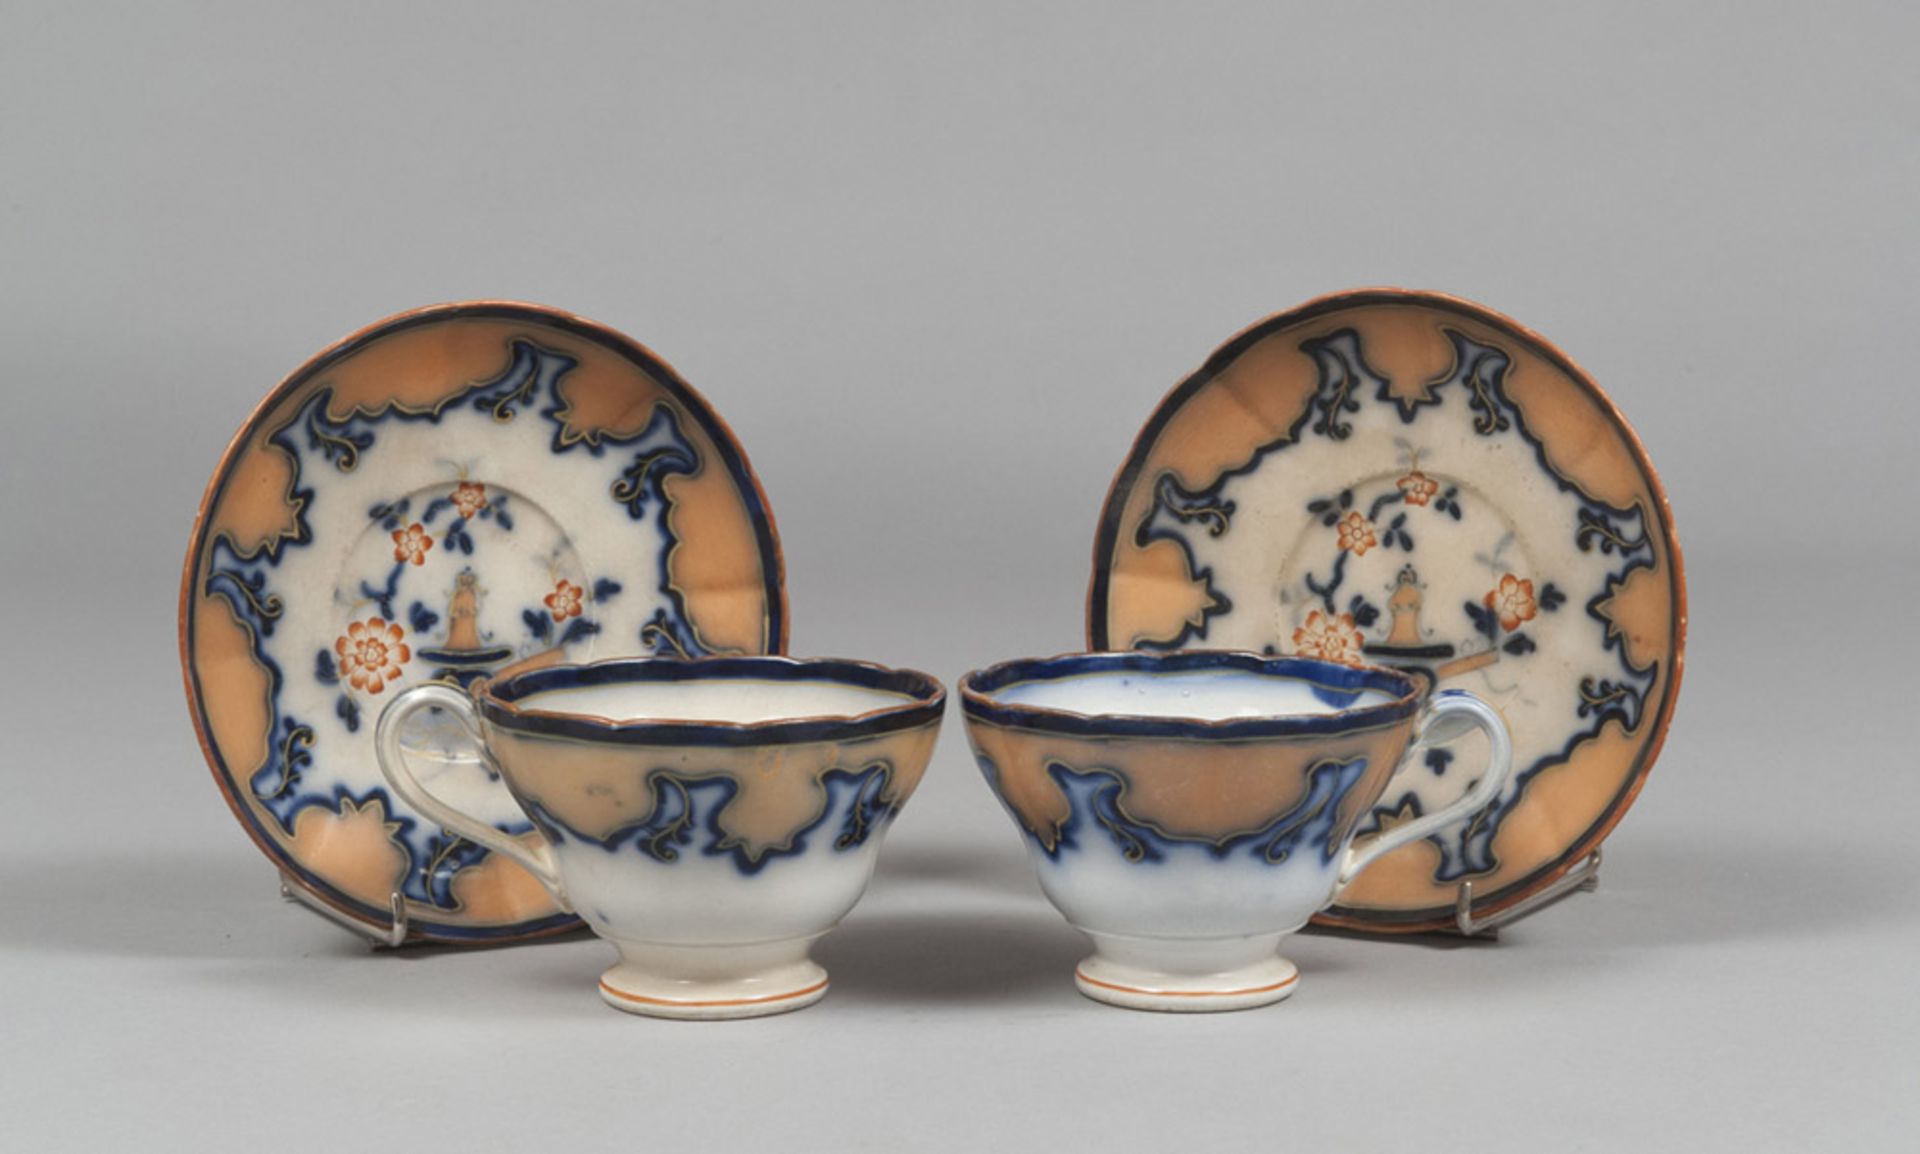 PAIR OF CUPS IN EARTHENWARE, PROBABLY ENGLAND, 19TH CENTURY